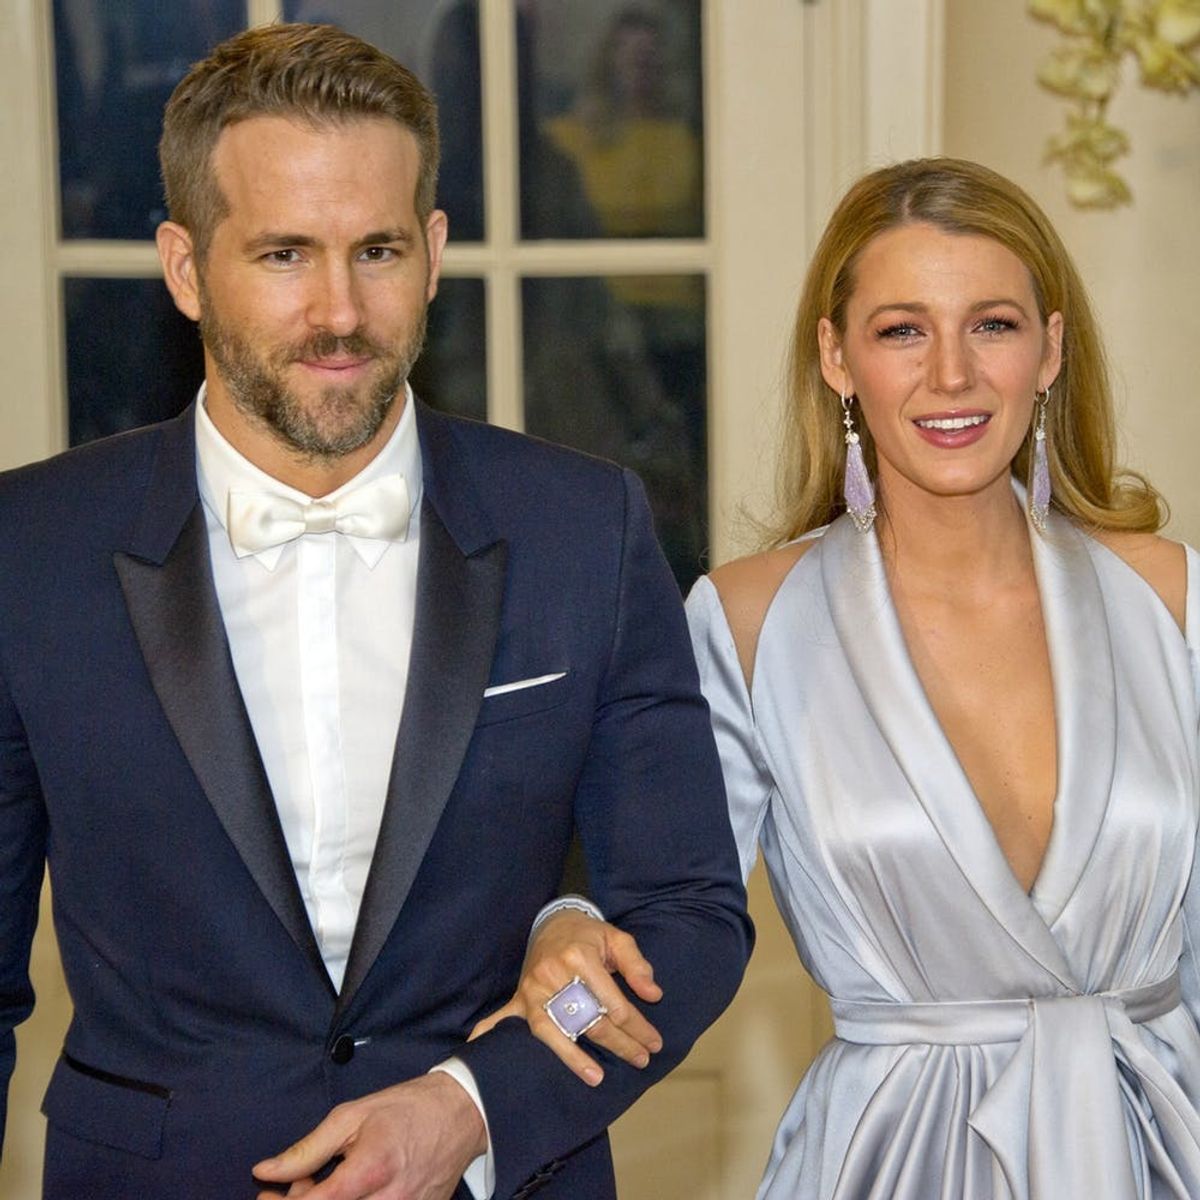 Blake Lively’s Mother’s Day Gift from Ryan Reynolds Will Make You Green With Envy